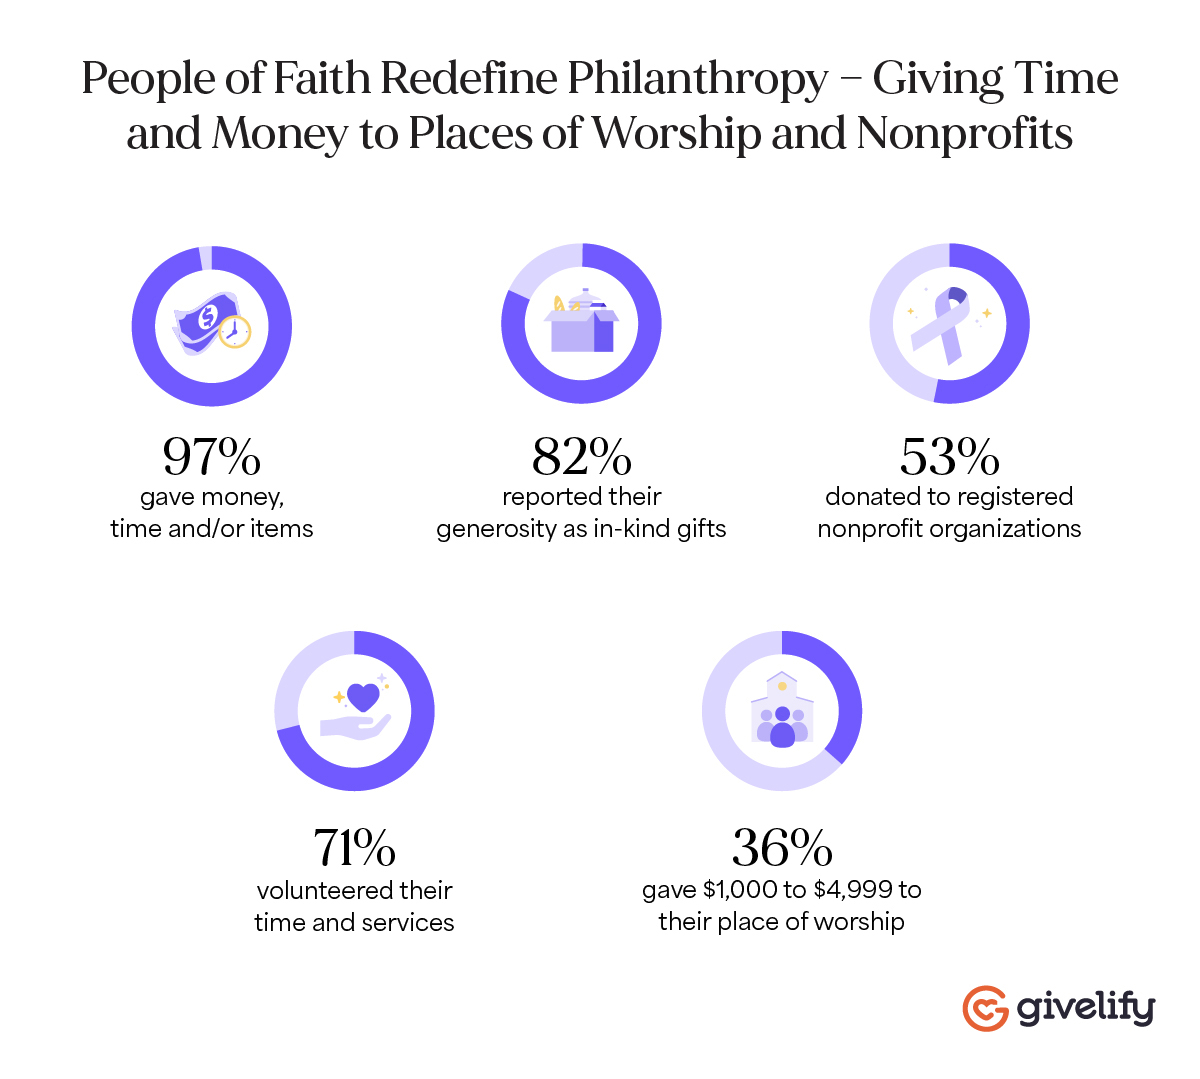 "People of Faith Redefine Philanthropy - Giving Time and Money to Places of Worship and Nonprofits" (Graphic courtesy Givelify)